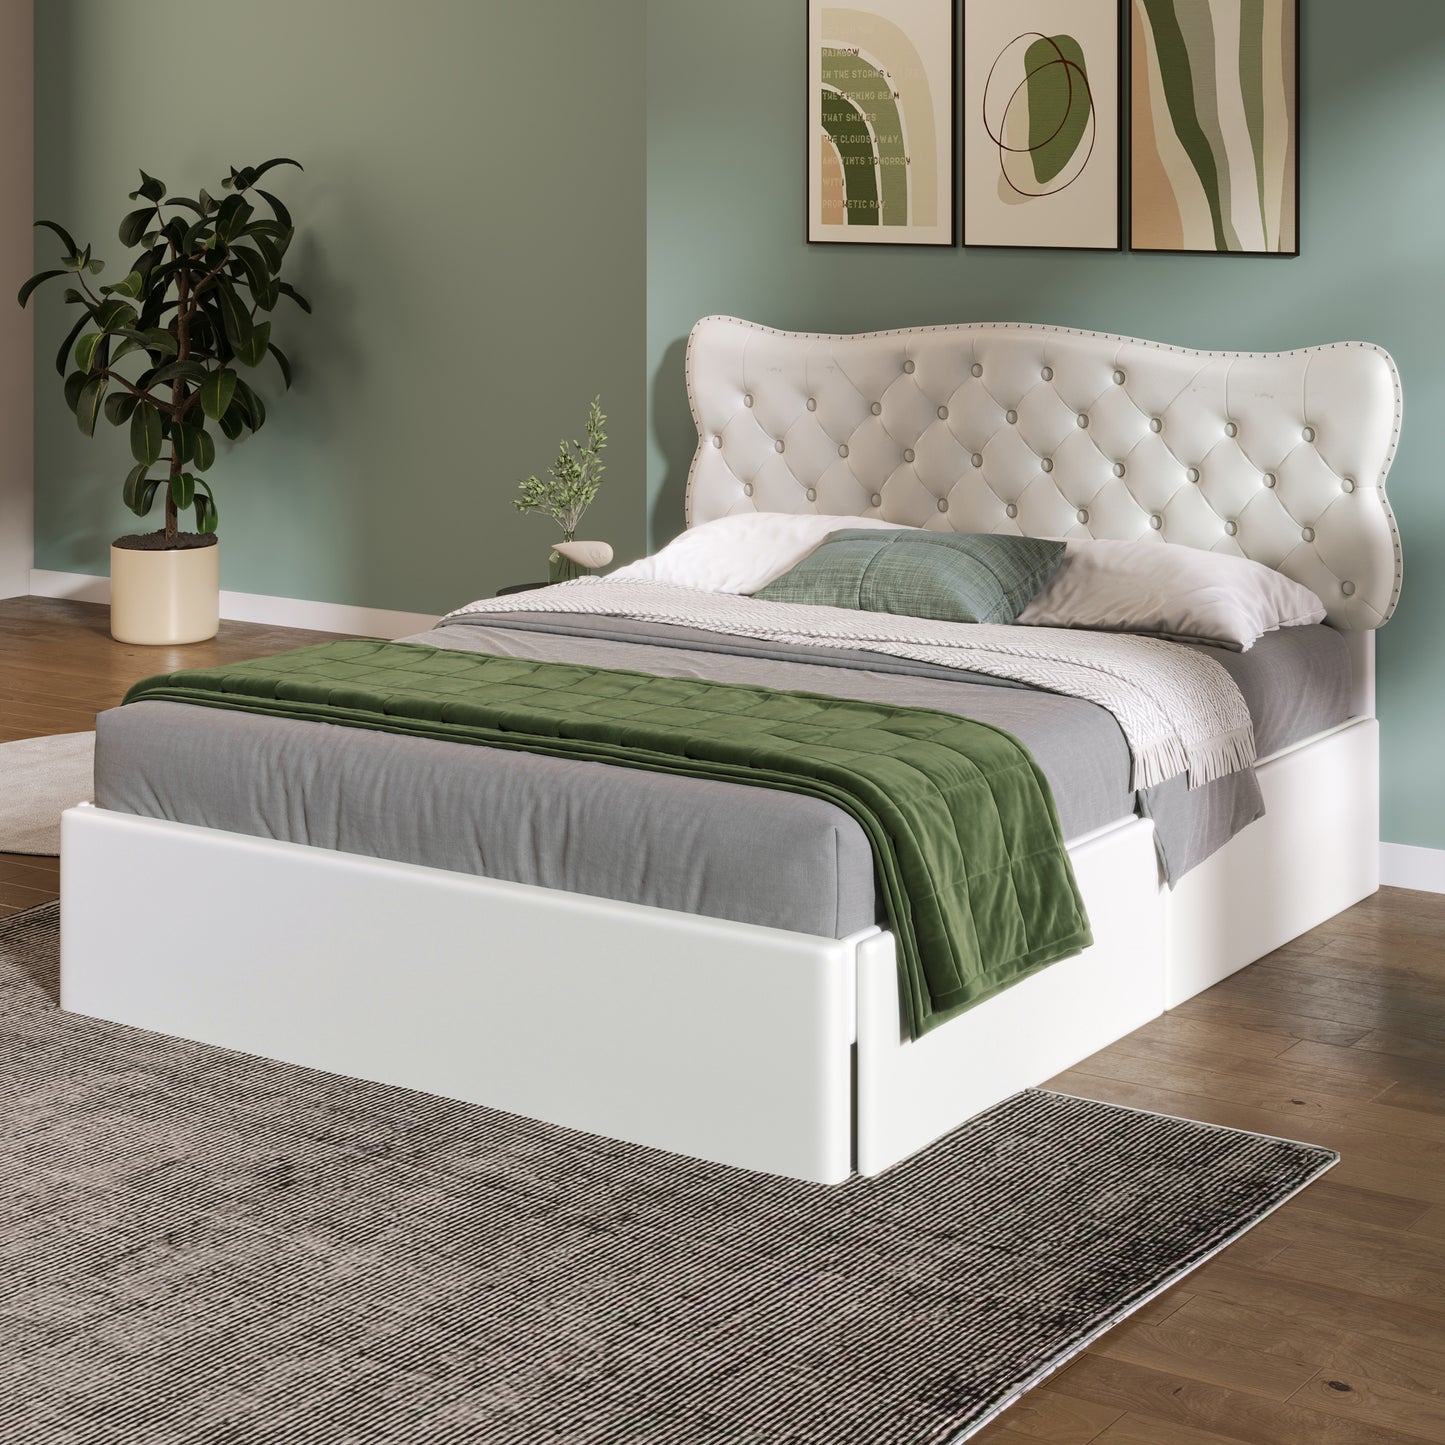 Queen Size Bed Frame with 4 Storage Drawers,Leather Upholstered Platform Heavy Duty Bed,Wood Slat Support,White